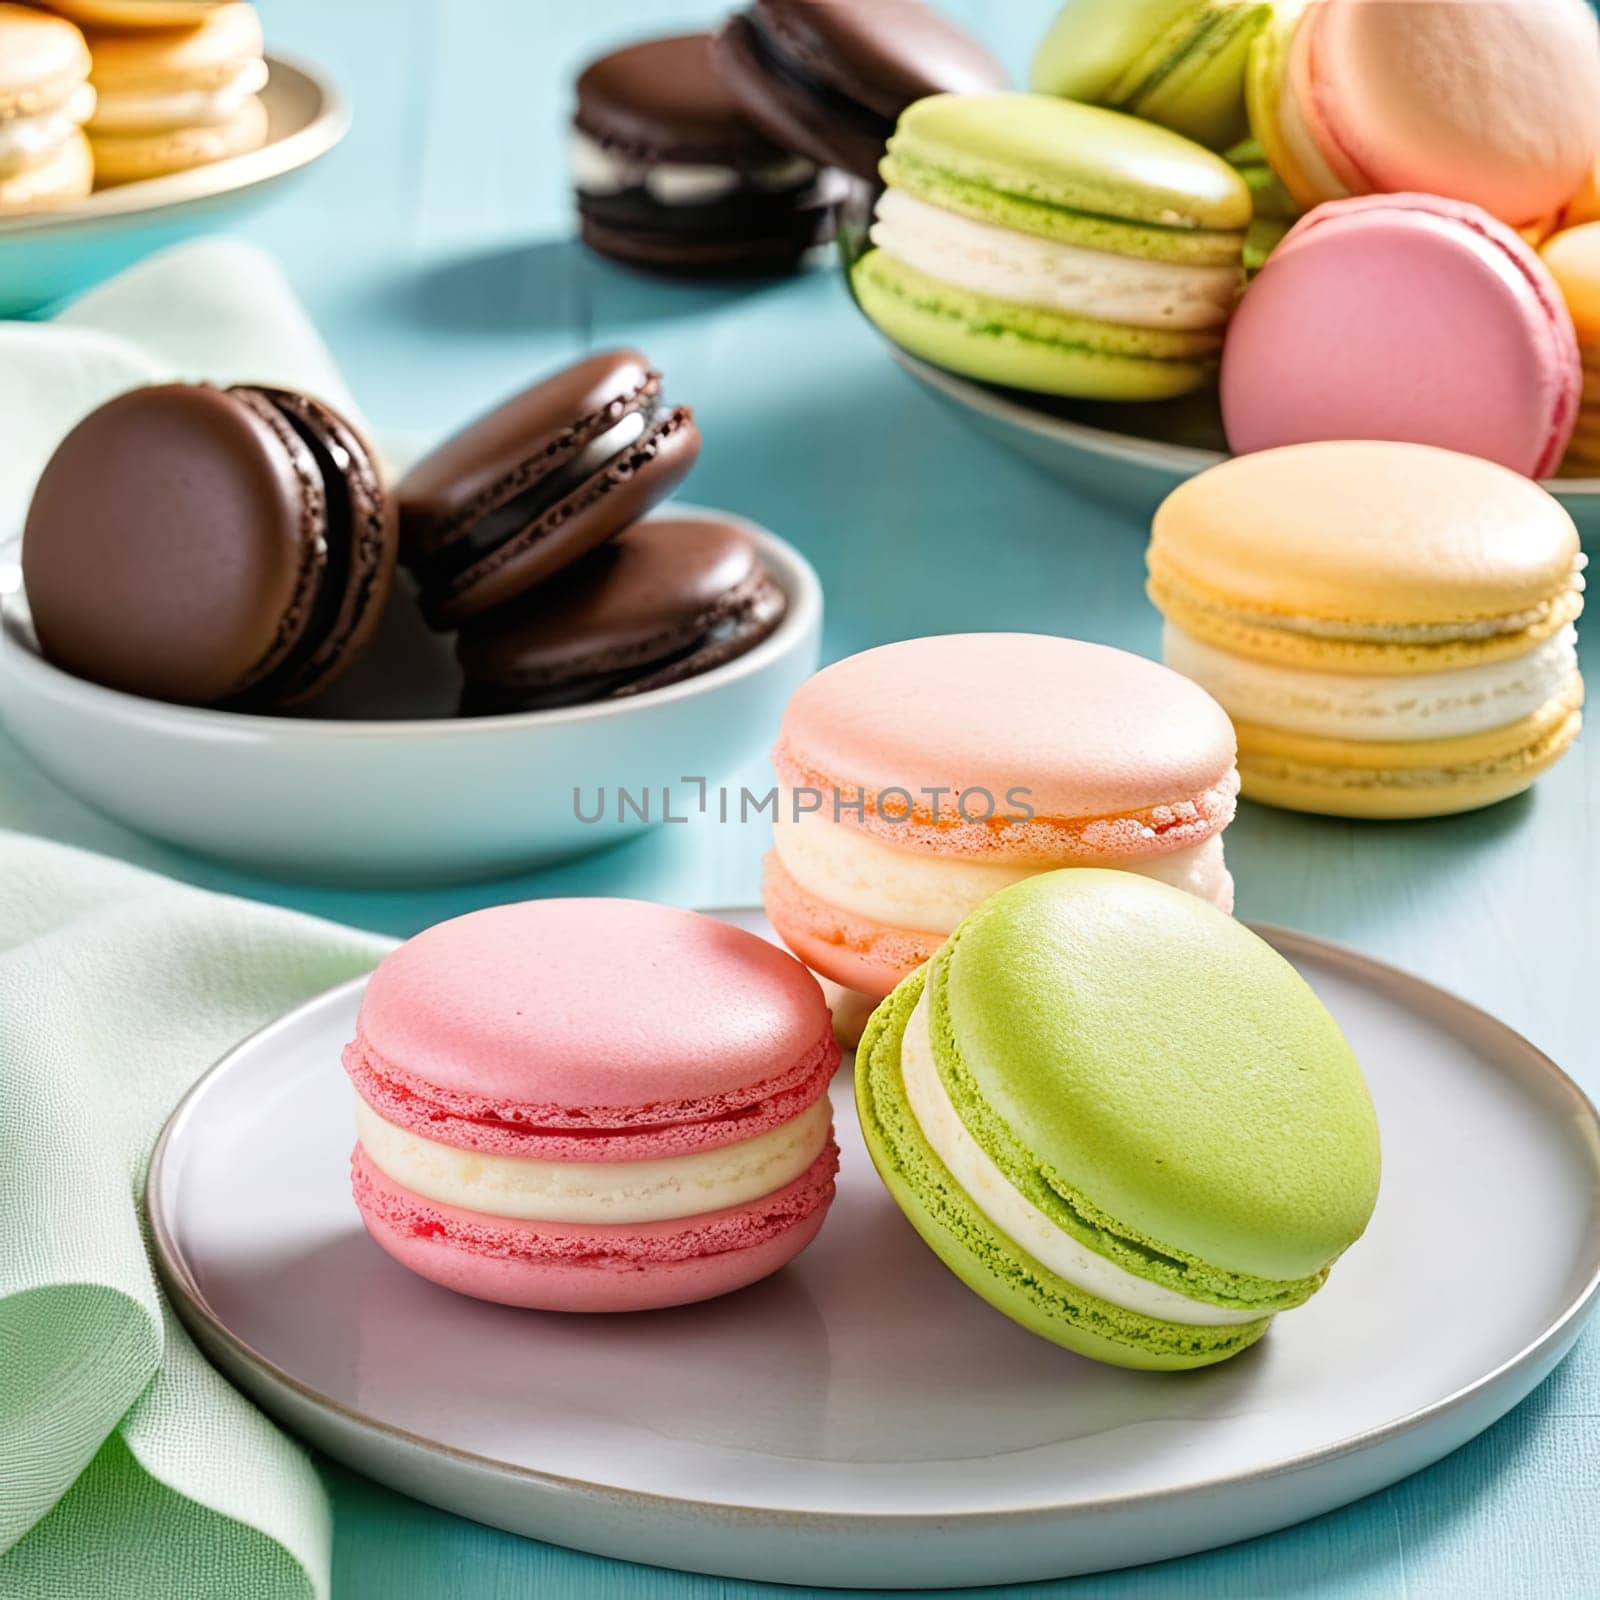 Assorted Colorful Macarons on plate. Tasty dessert